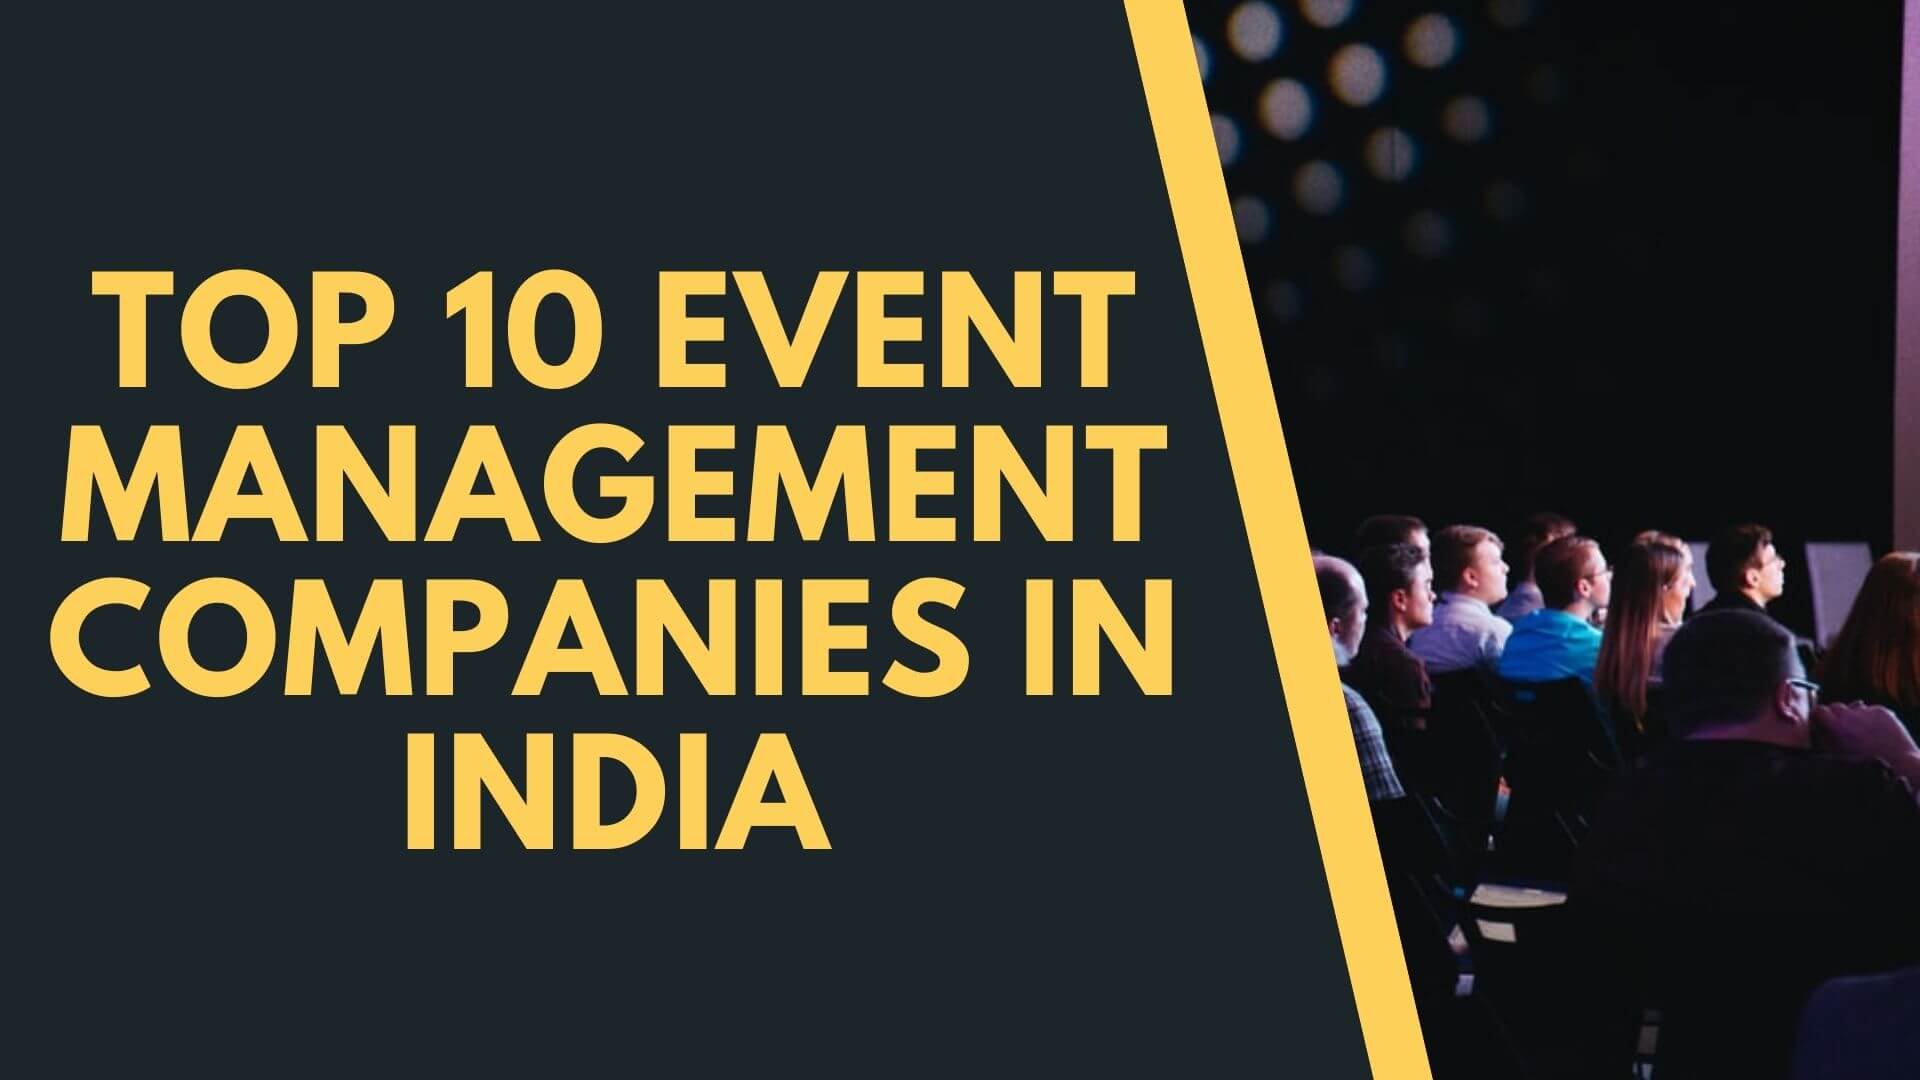 Top 10 Best Event Management Companies in India